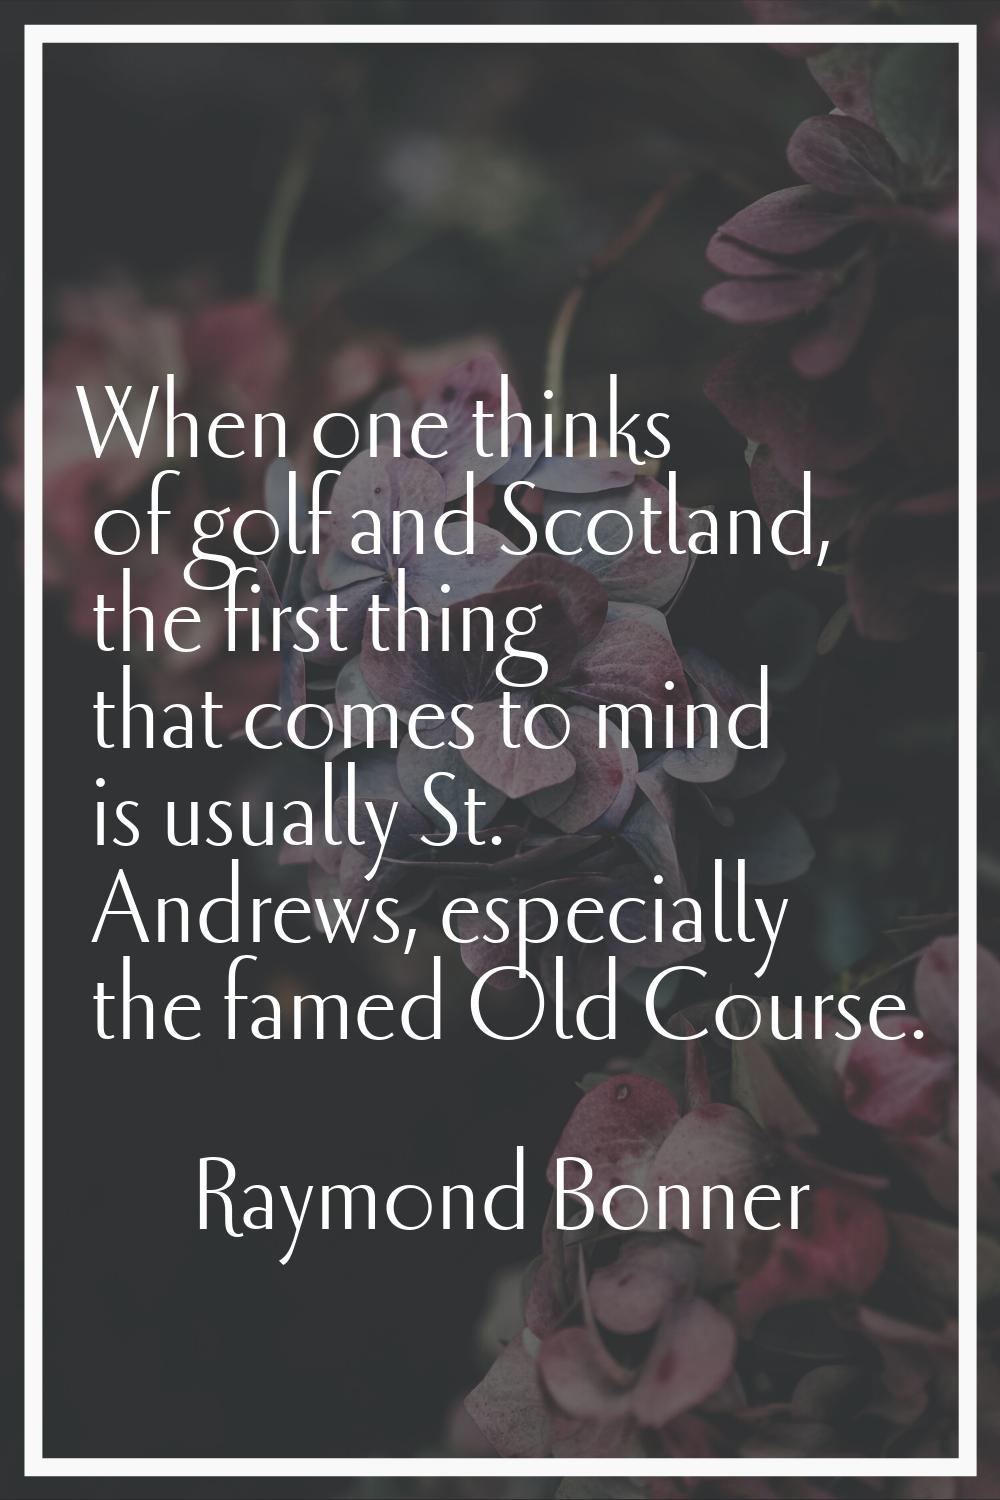 When one thinks of golf and Scotland, the first thing that comes to mind is usually St. Andrews, es